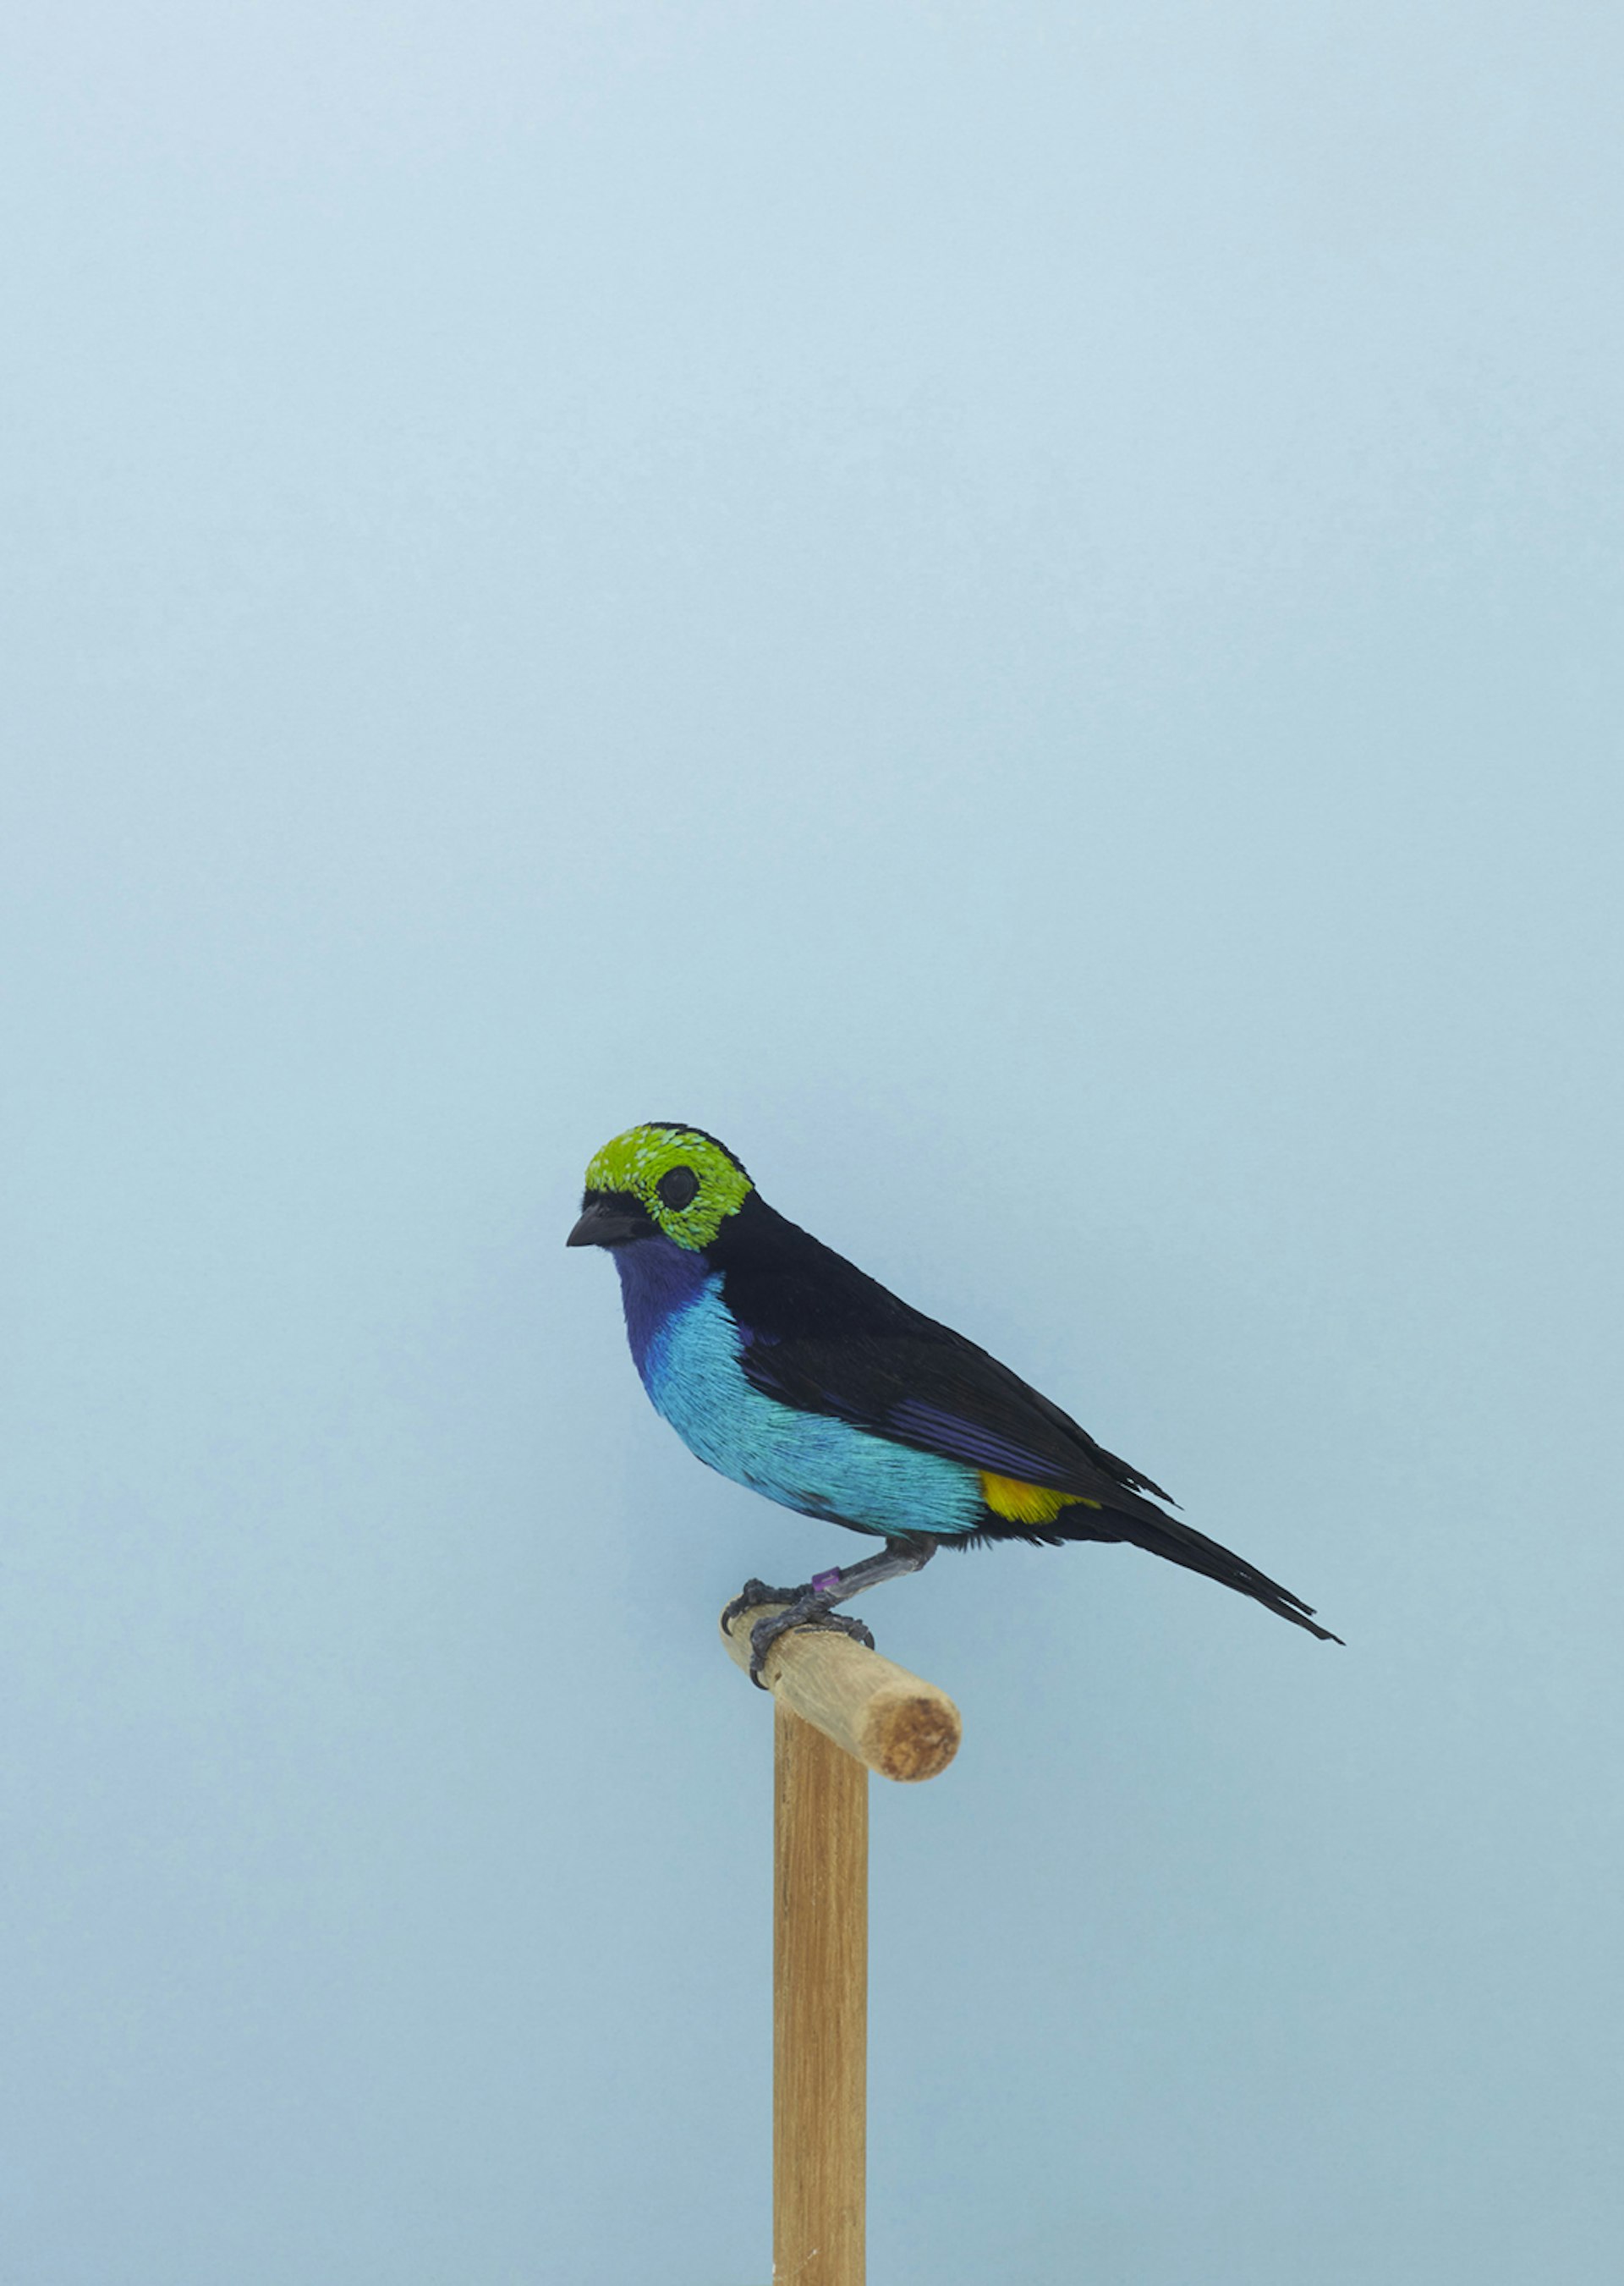 A60W9781-Paradise tanager